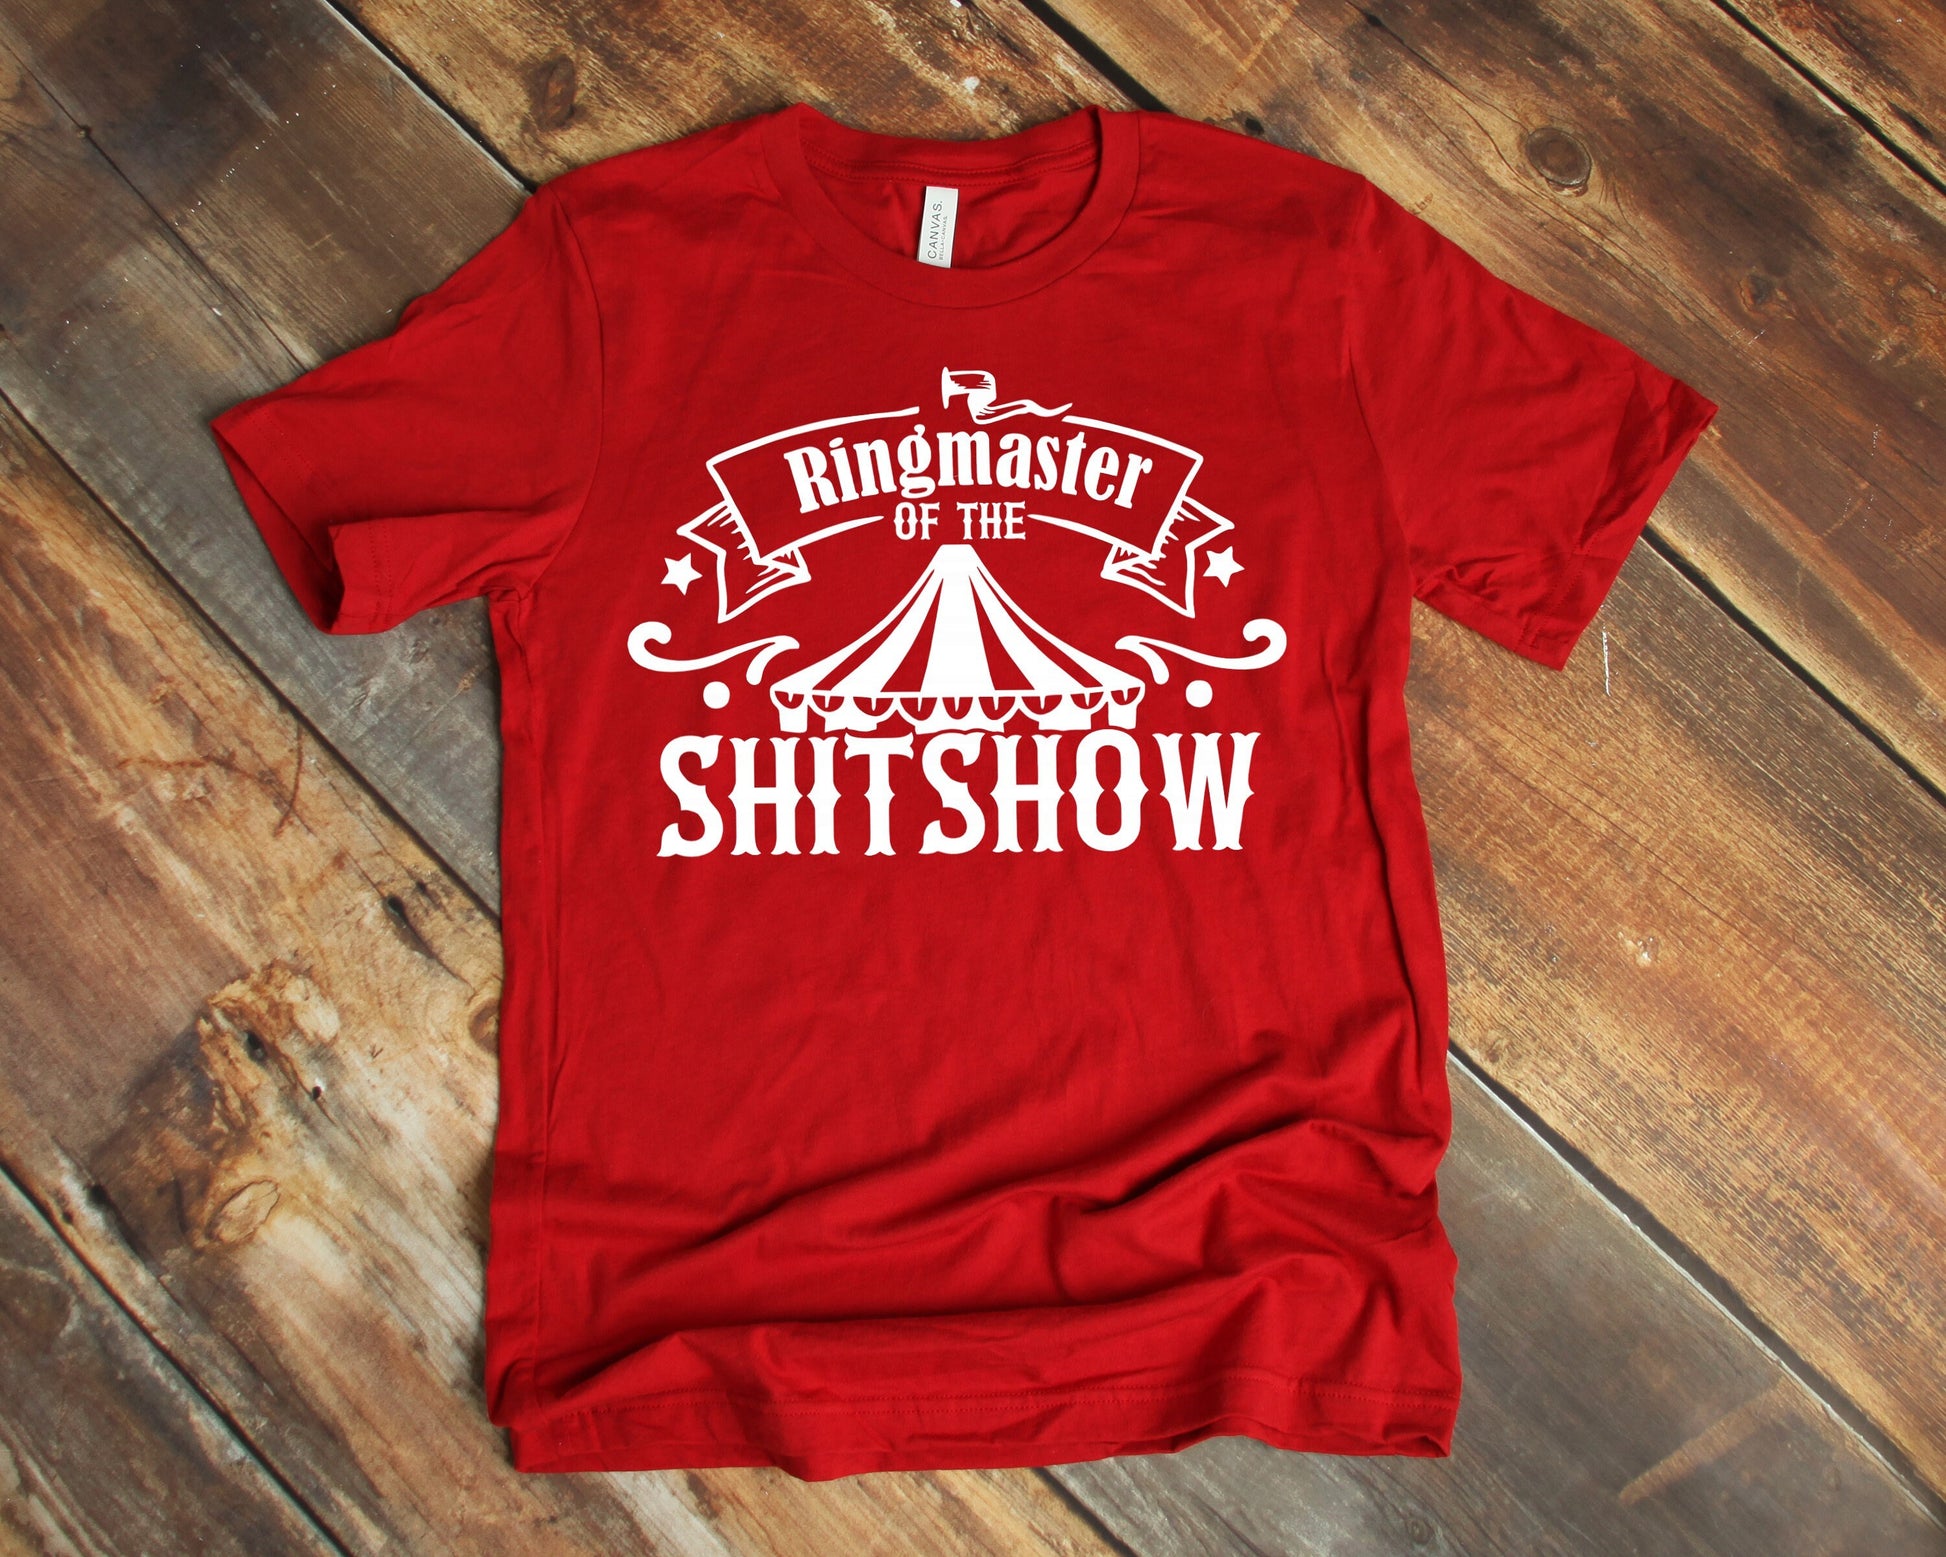 Ringmaster of the Shitshow unisex t-shirt - funny t-shirt - shirt for mom - shirt for dad - funny gifts - novelty t-shirt - offensive shirts